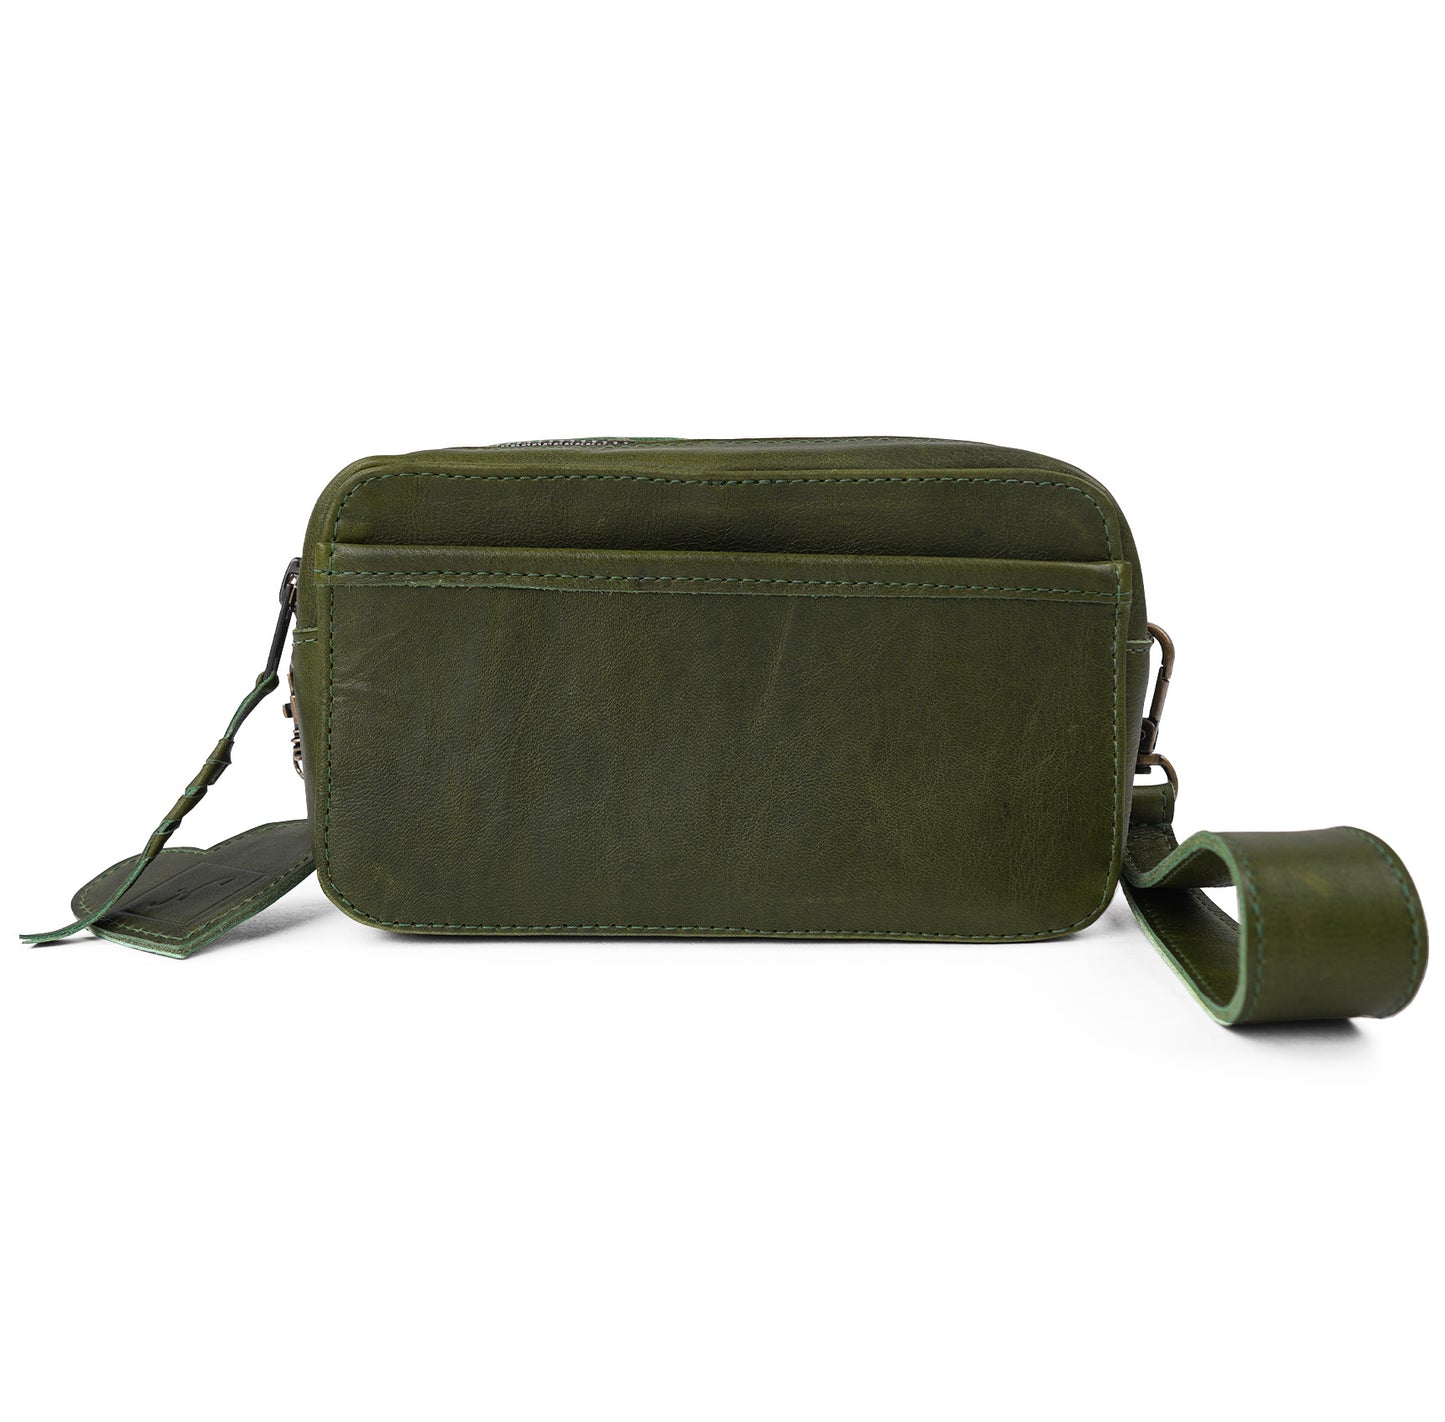 BETSY'S ESSENTIALS BAG - FULL LEATHER COLLECTION - DEEP EMERALD